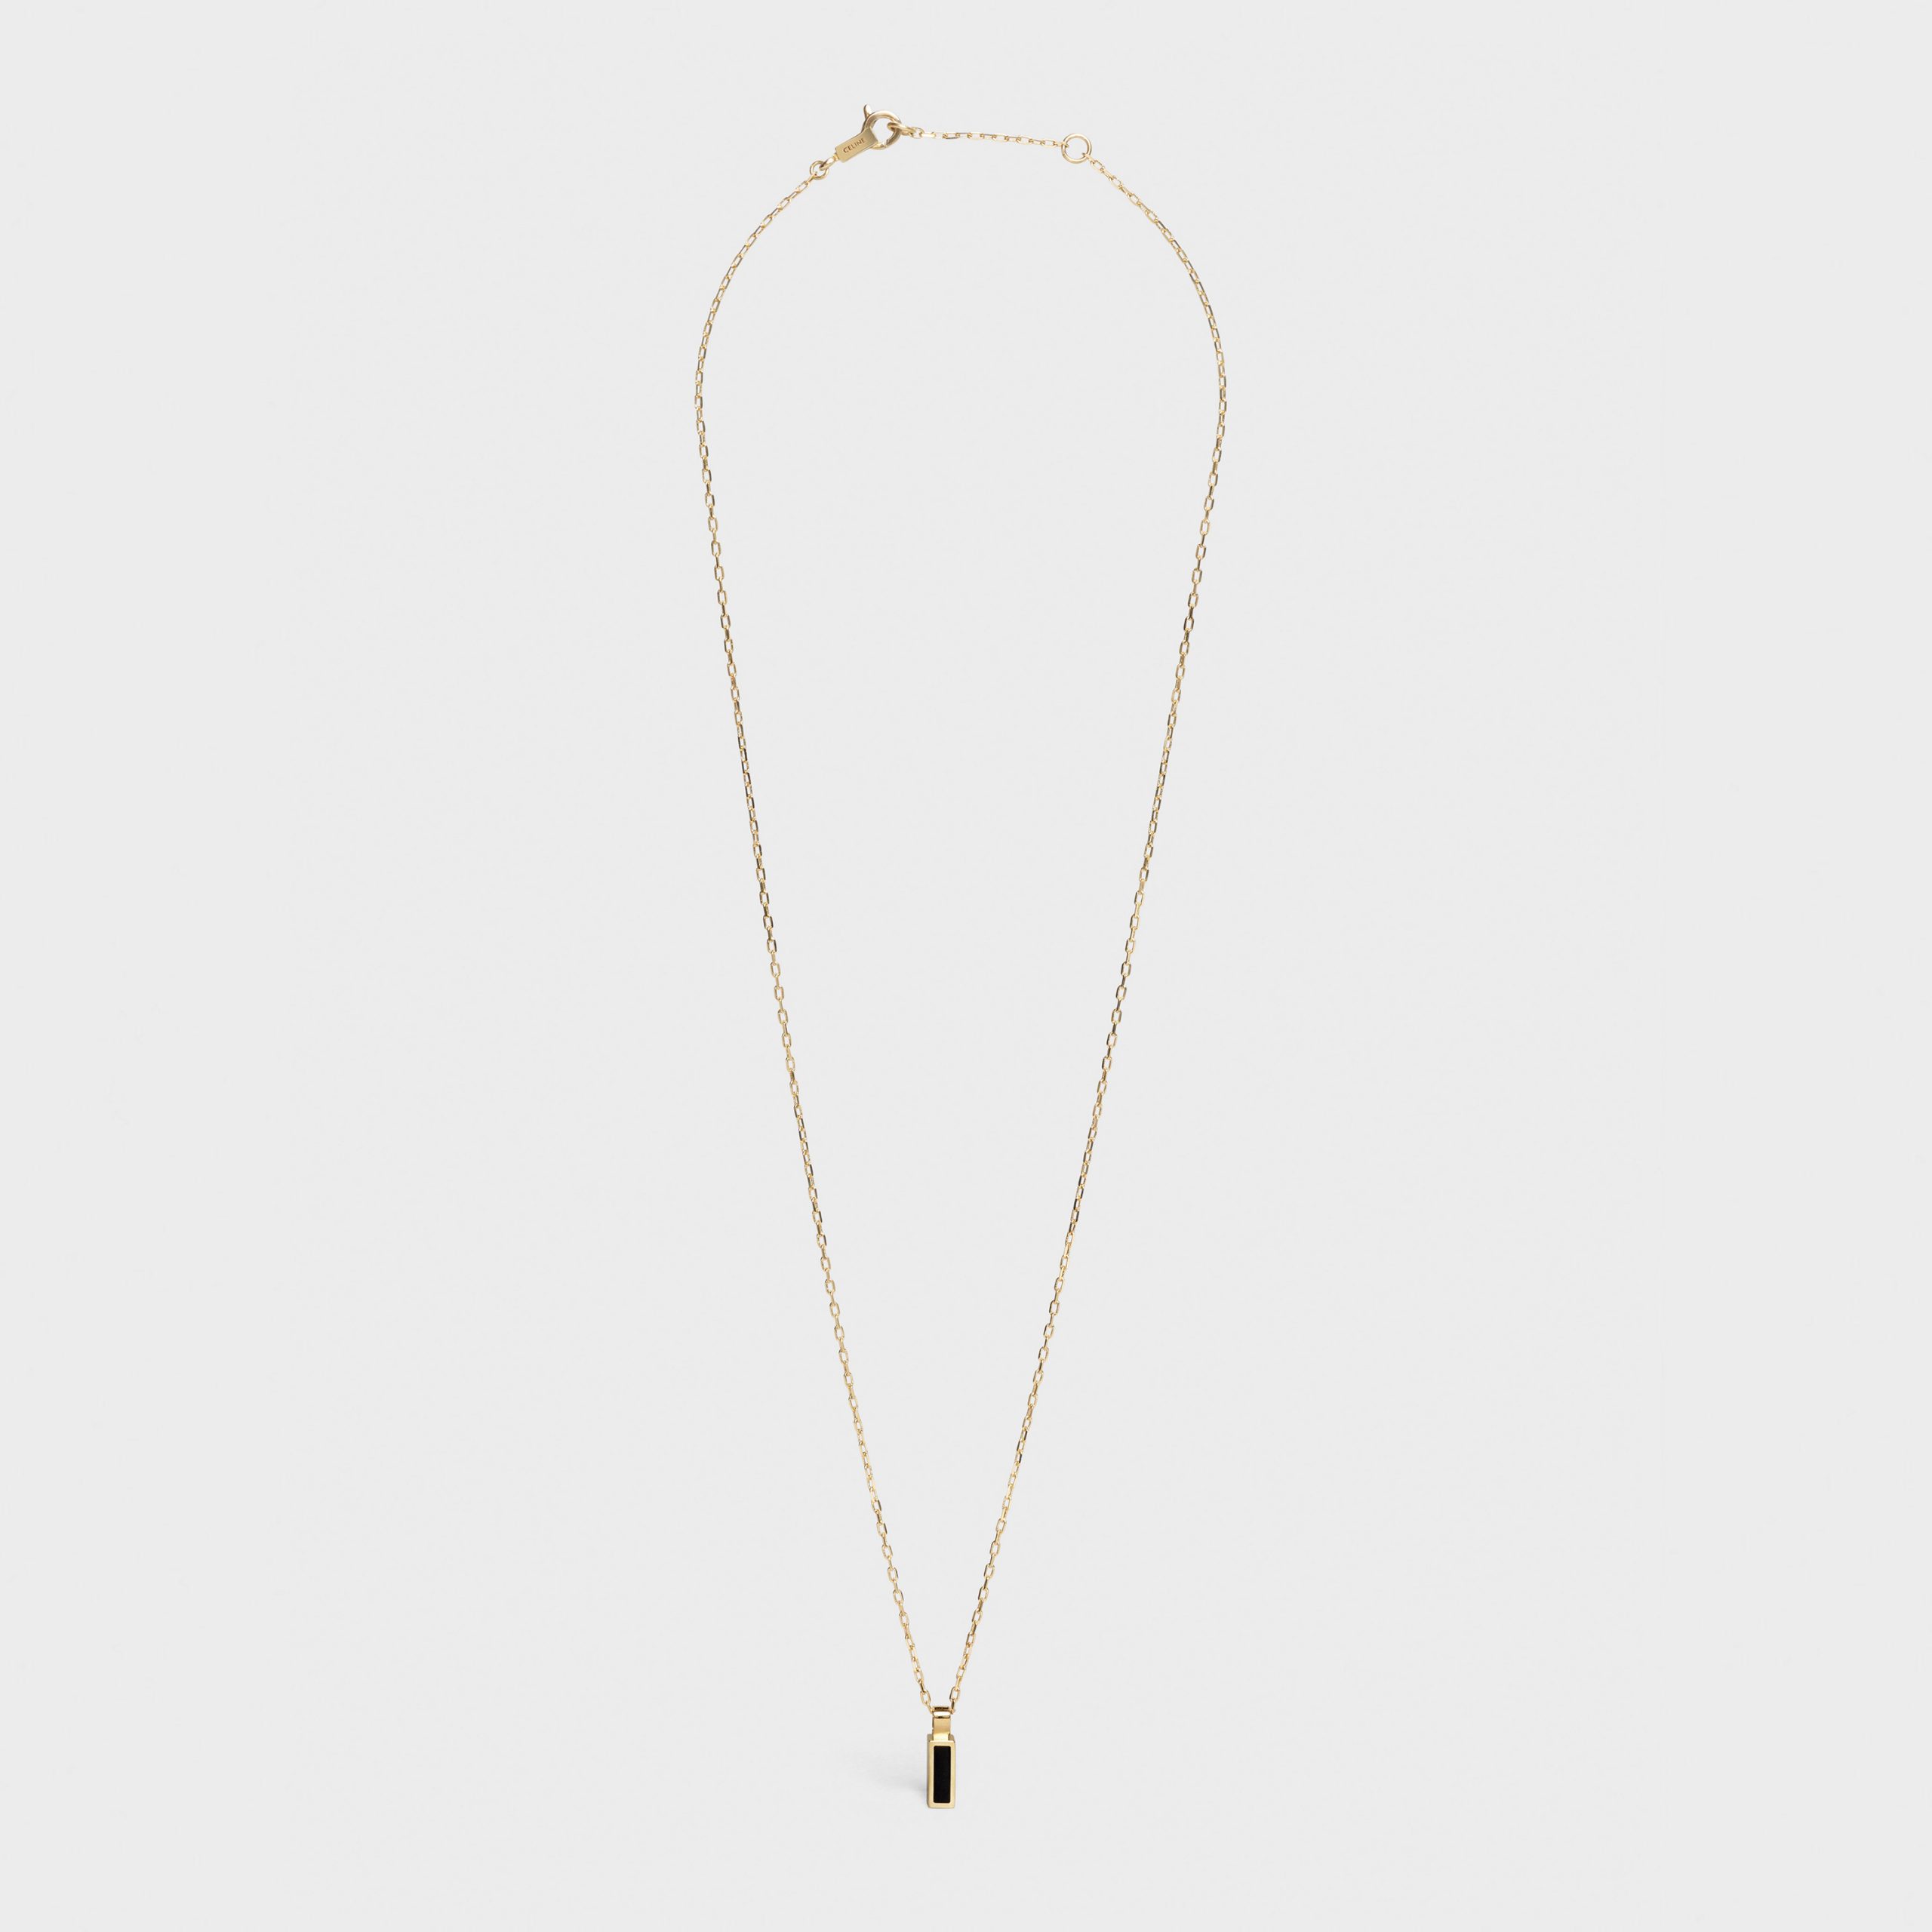 Celine Celine Sentimental Baguette Necklace In Yellow Gold And Onyx – Yellow Gold And Black – 46P266GYO.37YB